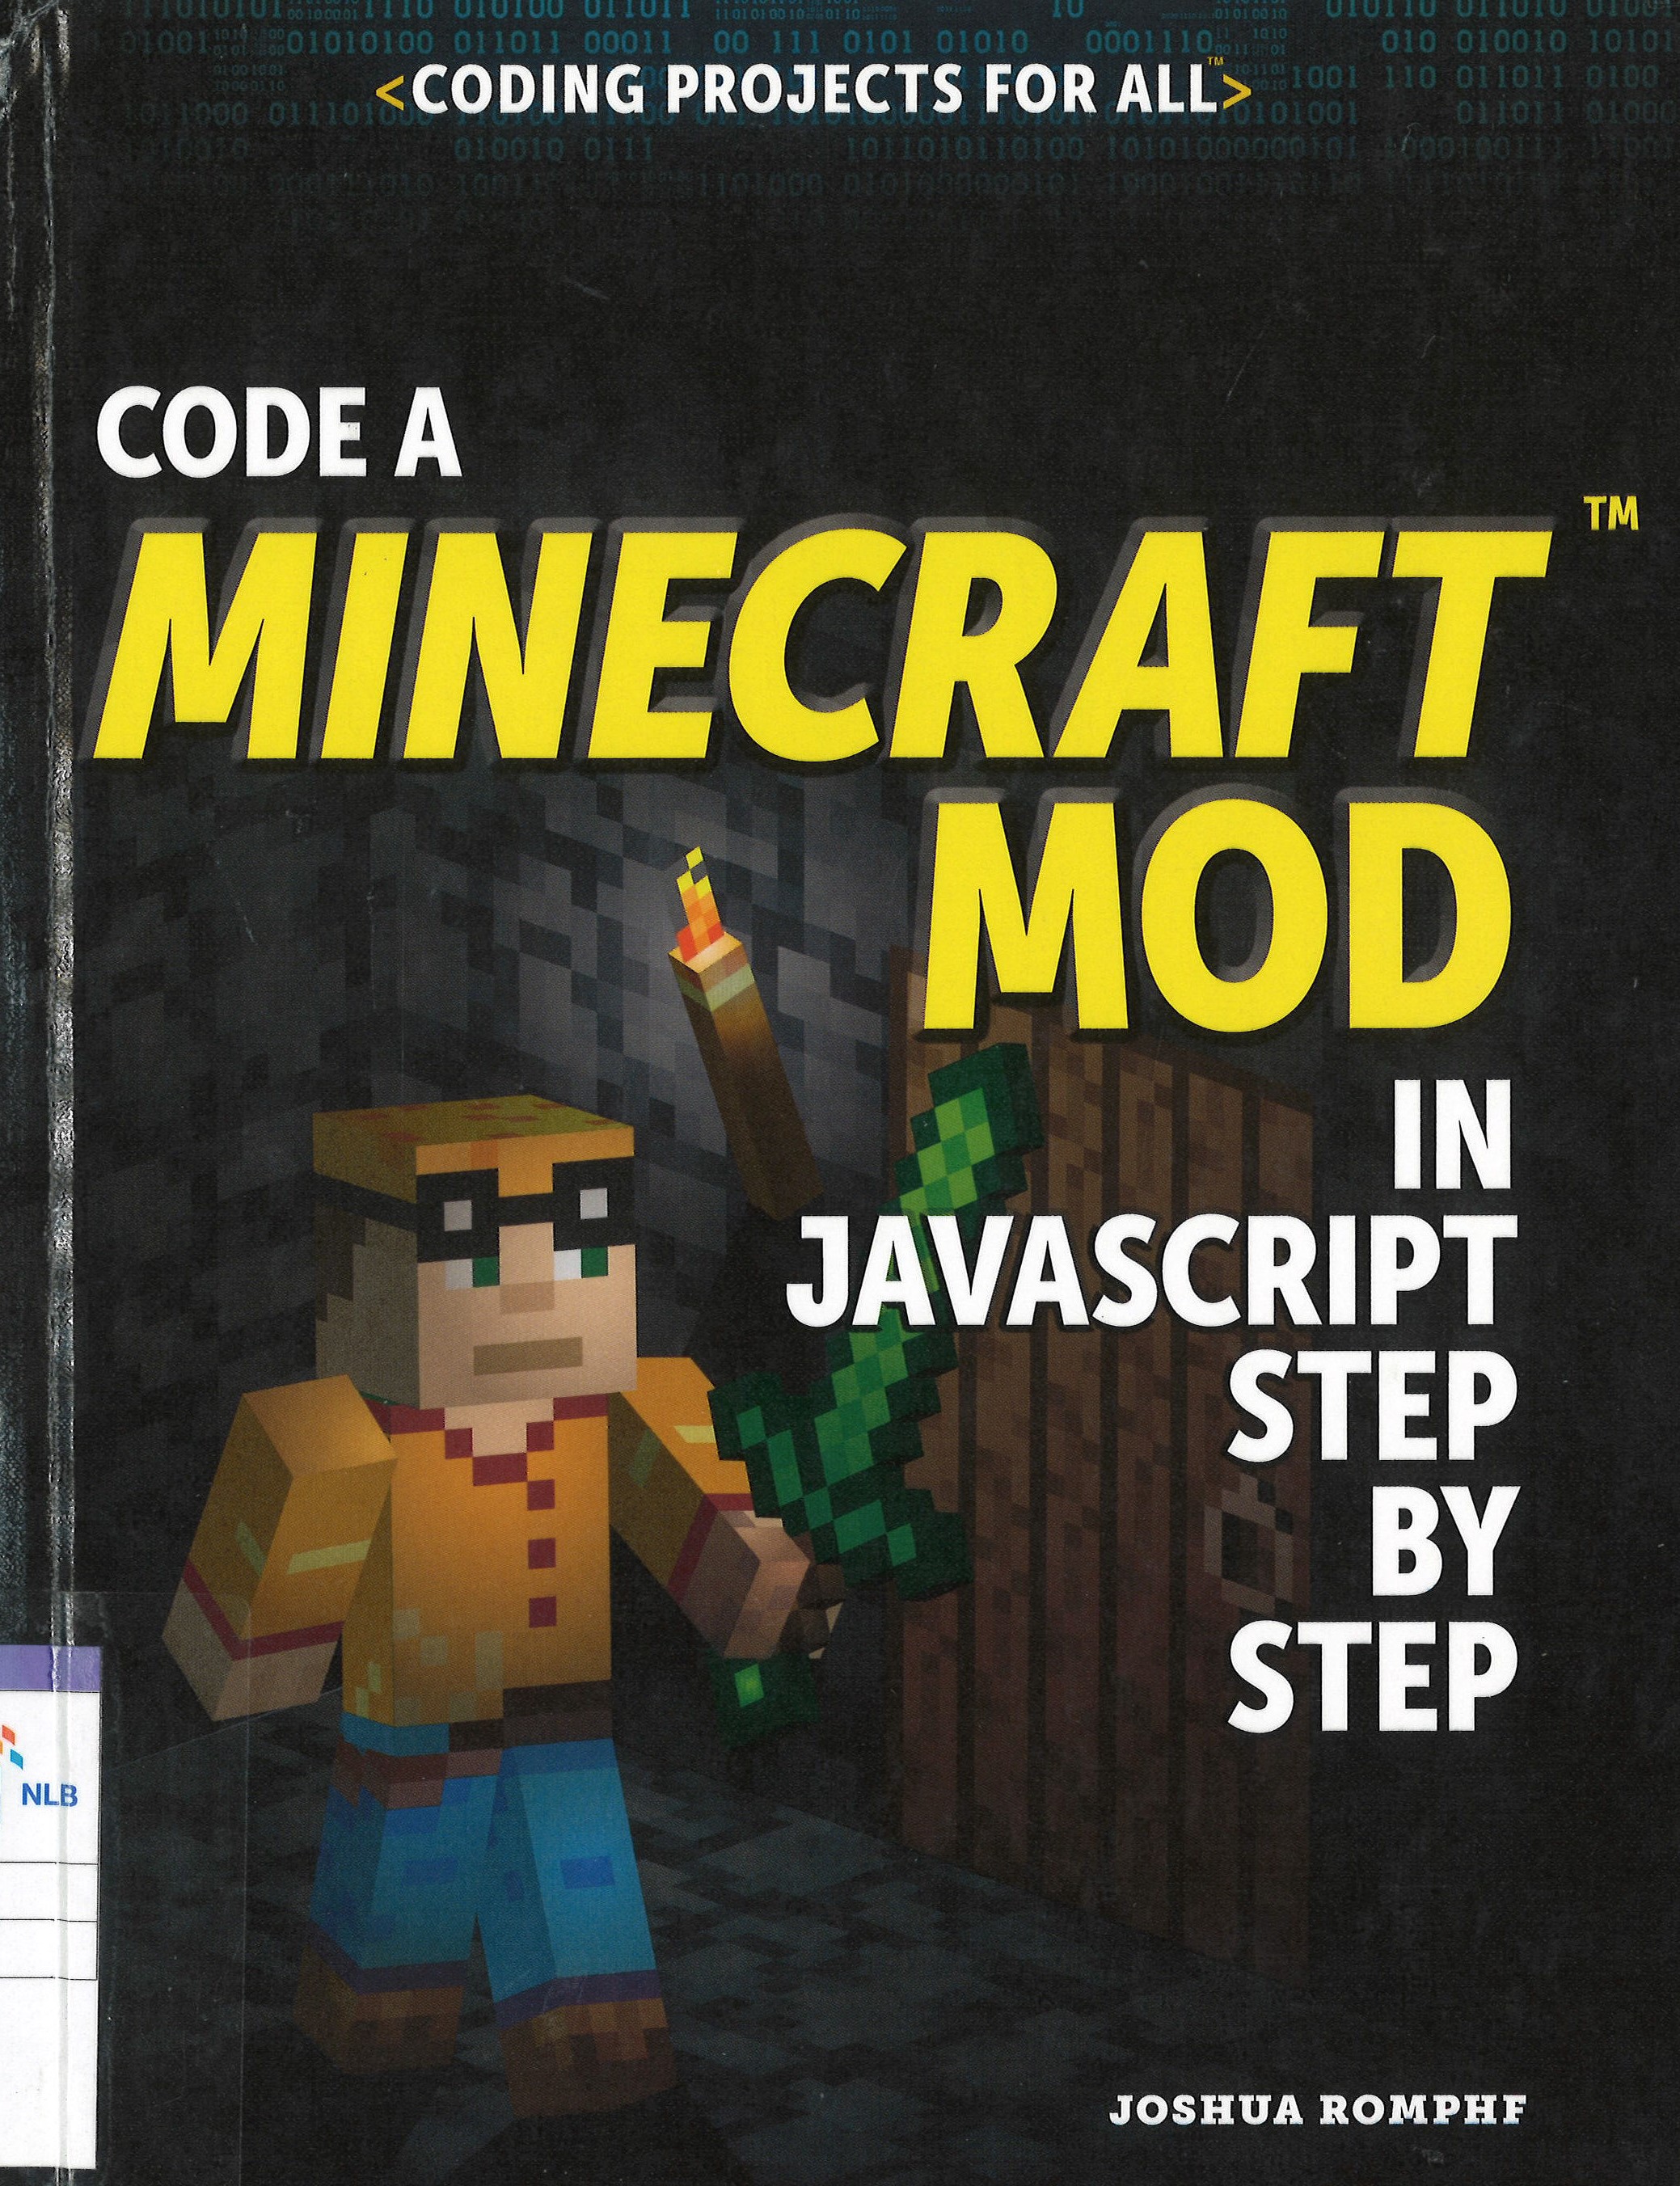 Code a Minecraft® Mod in JavaScript Step by Step book cover